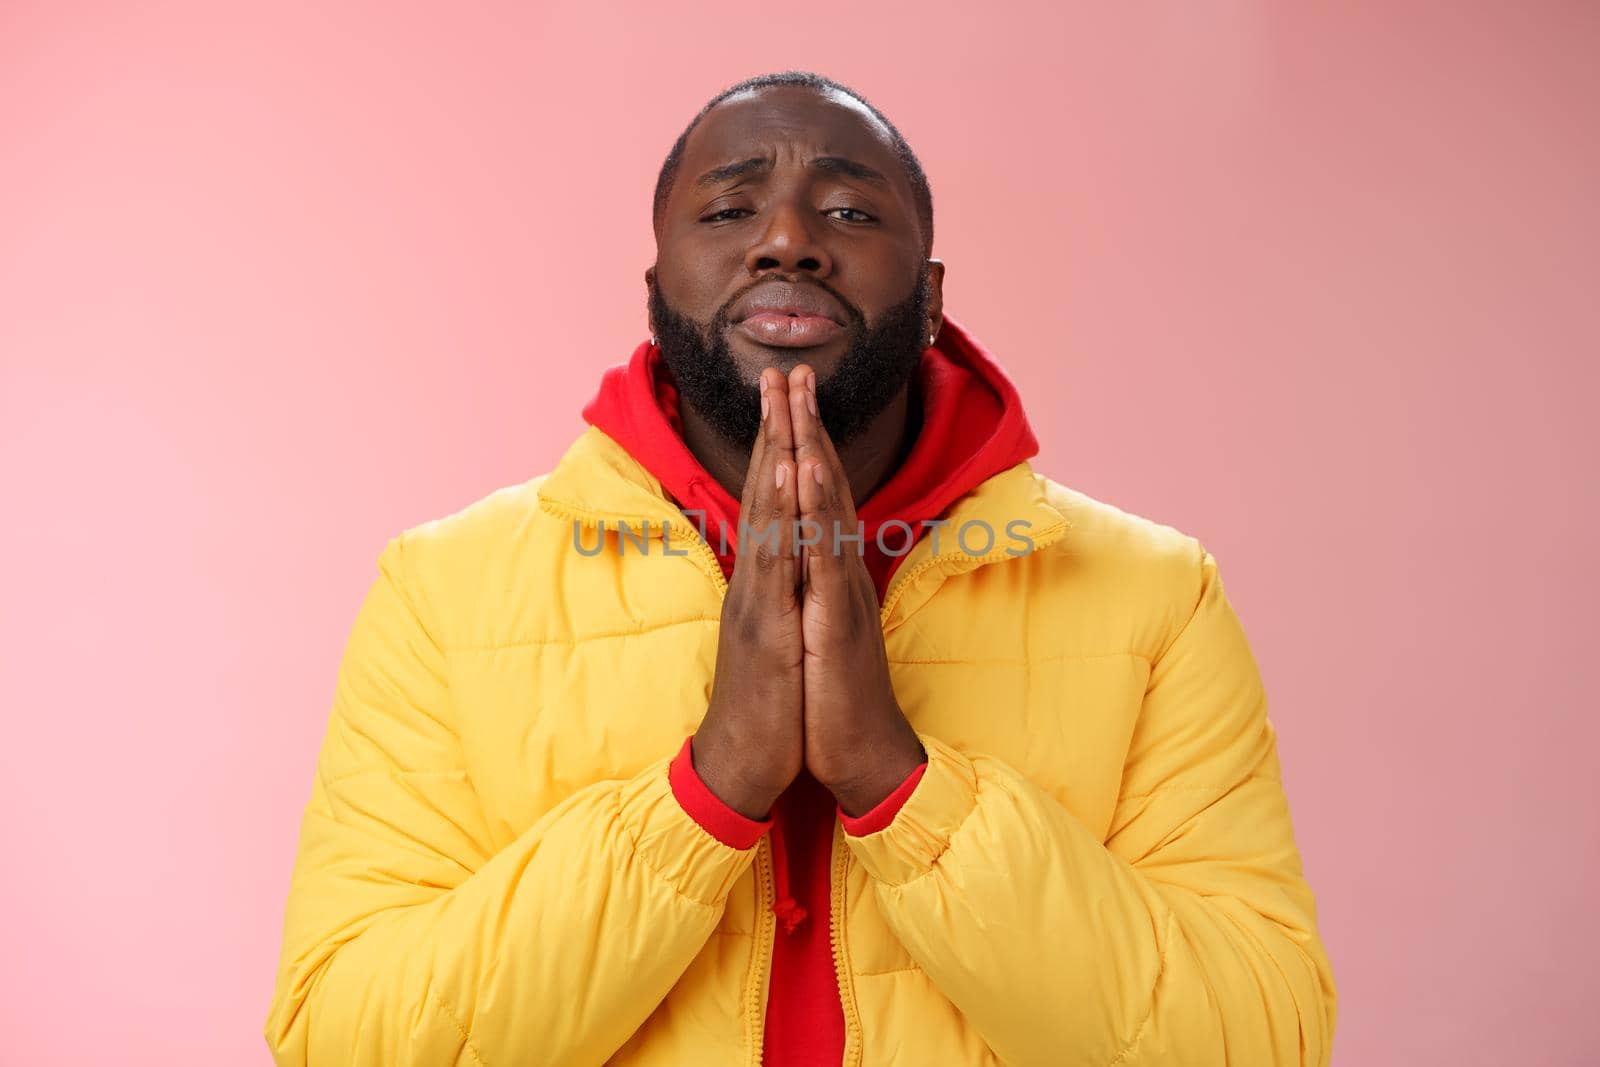 Miserable cute african-american bearded man in yellow coat asking help begging press palms supplicating apologizing please help, standing pink background sad need advice lending money.